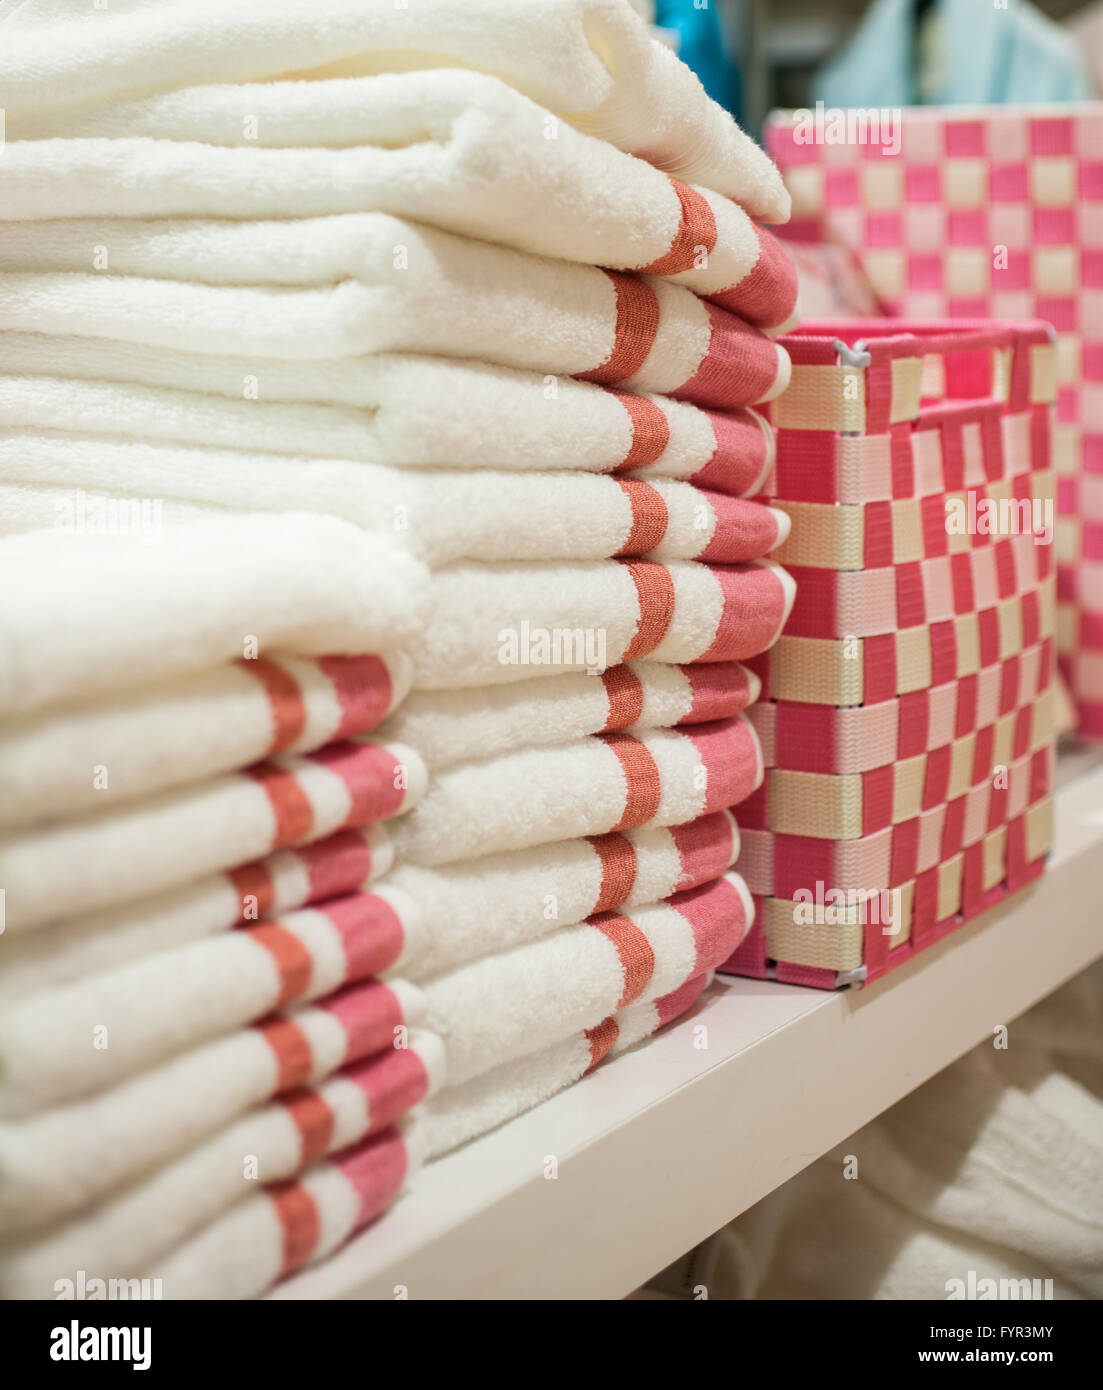 Close up of stack of softness towels Stock Photo